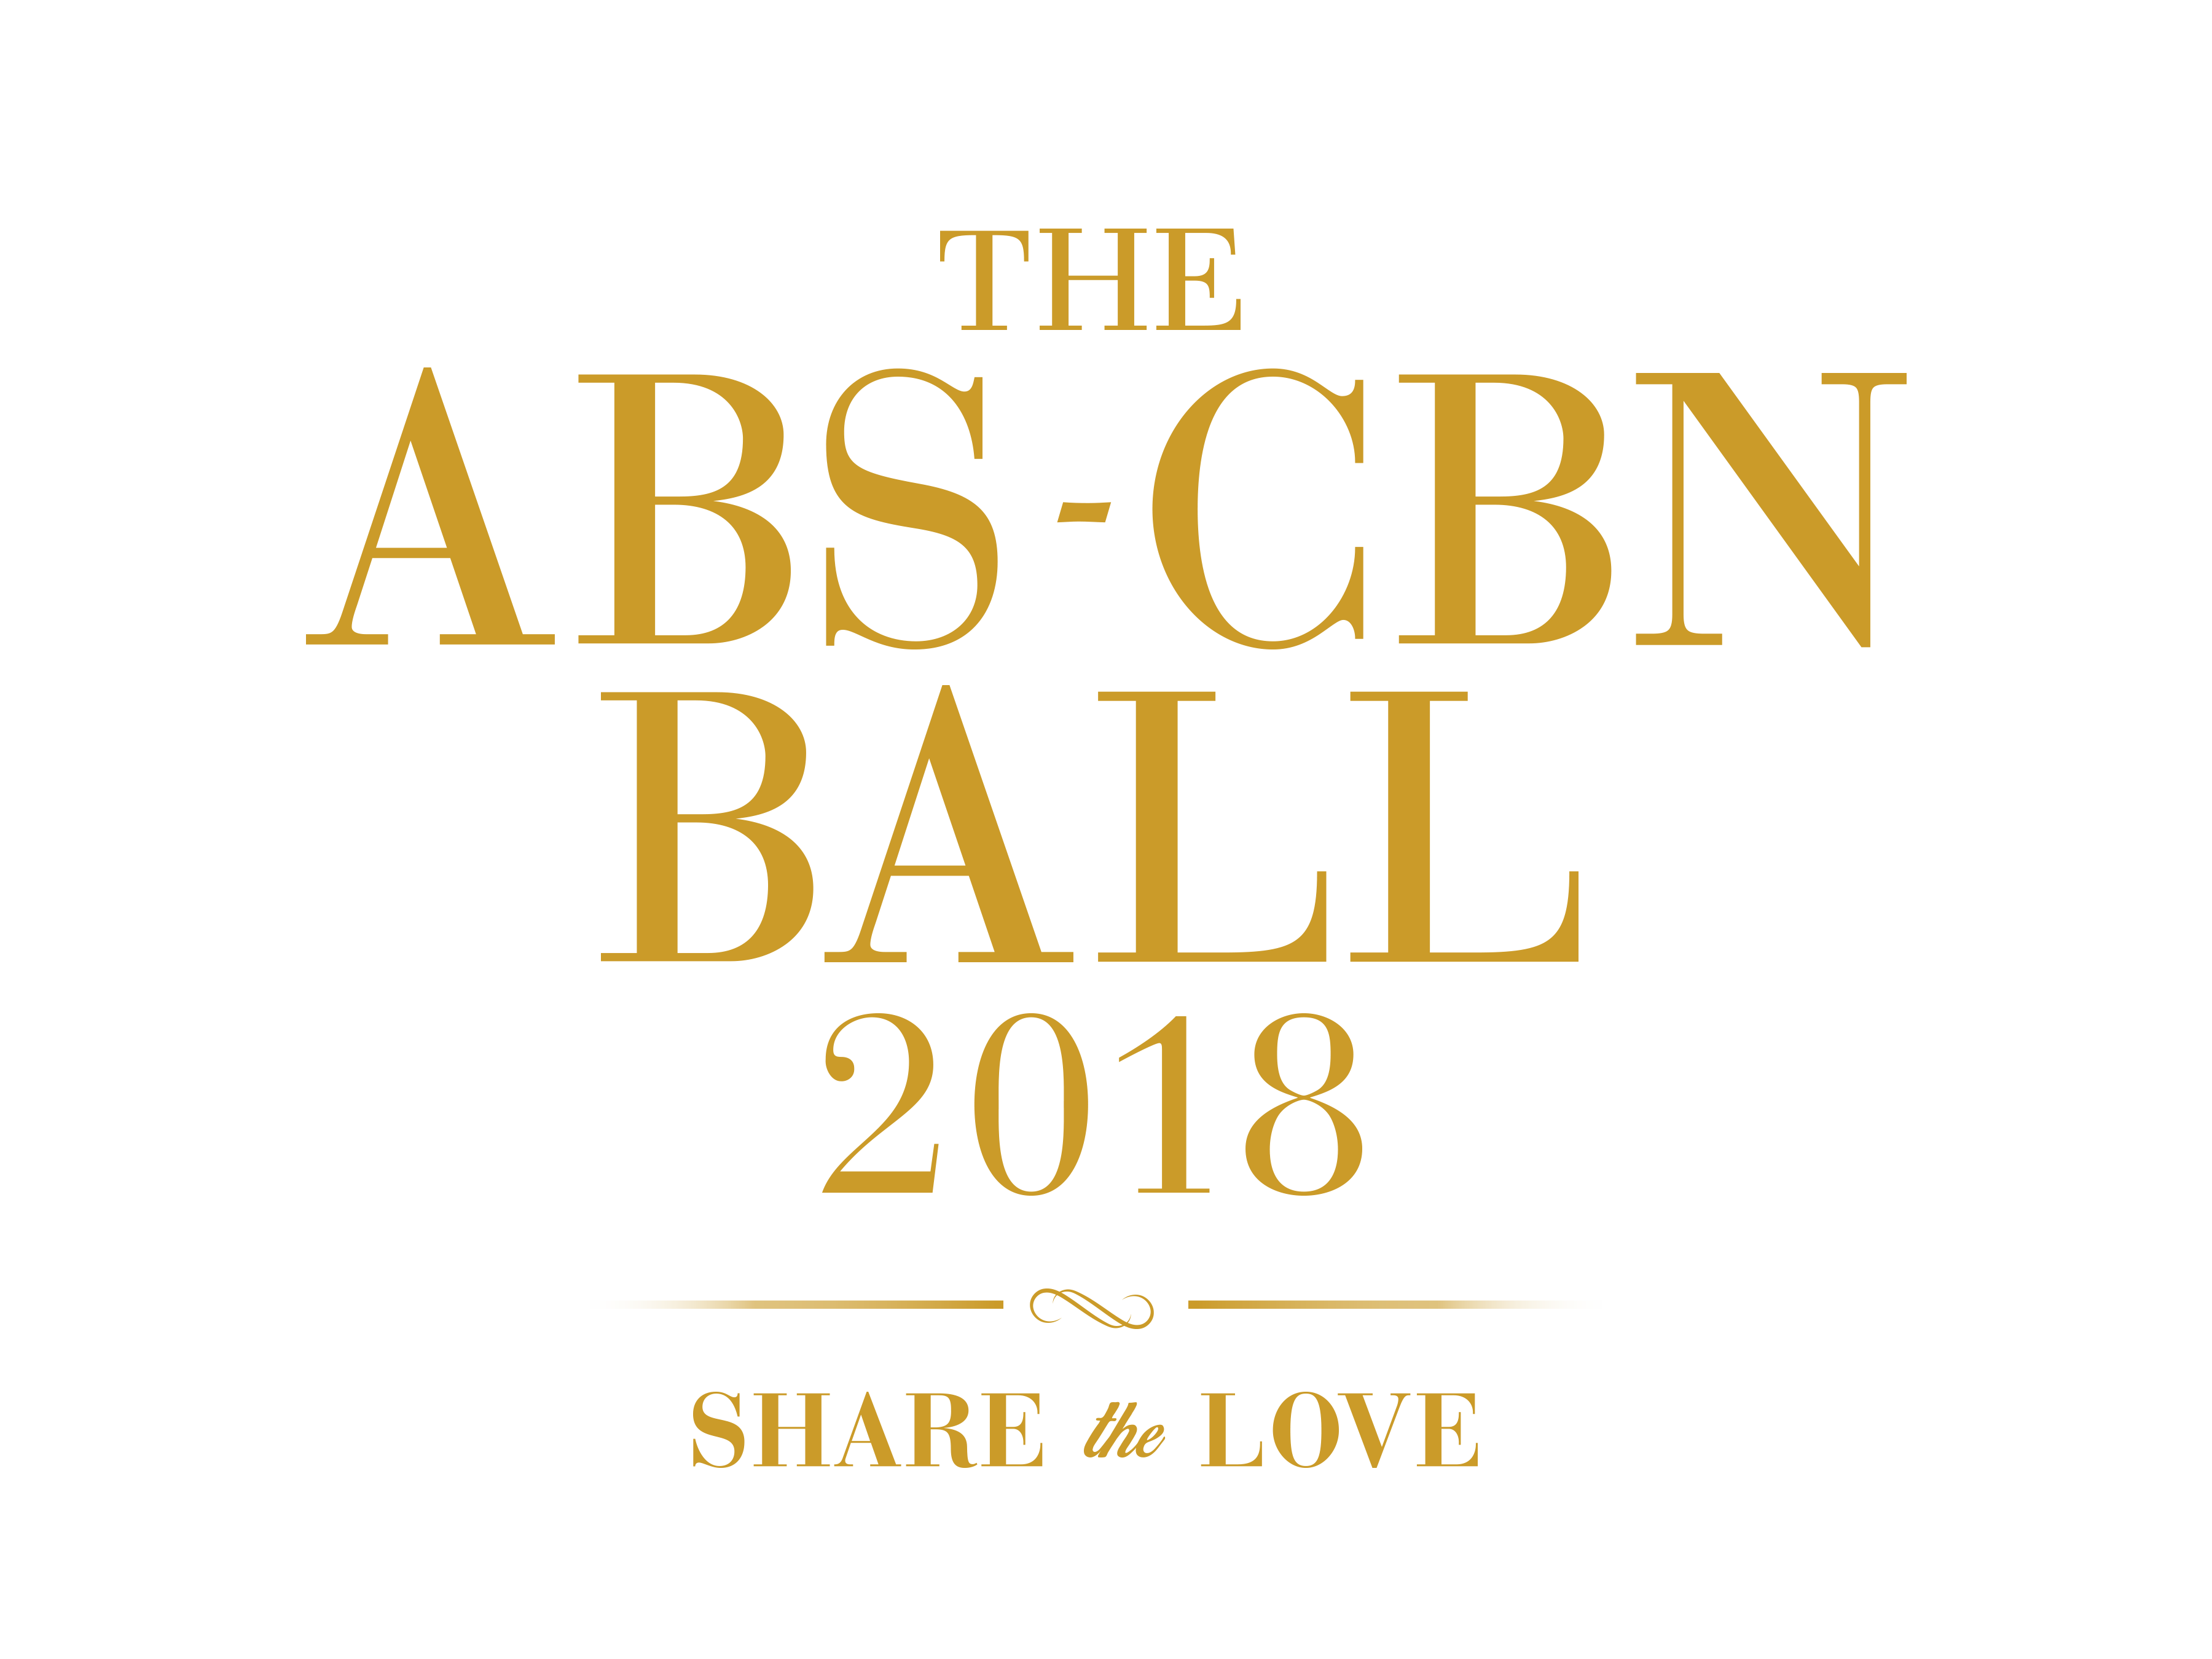 Vice Ganda attends the ABS-CBN Ball 2018 